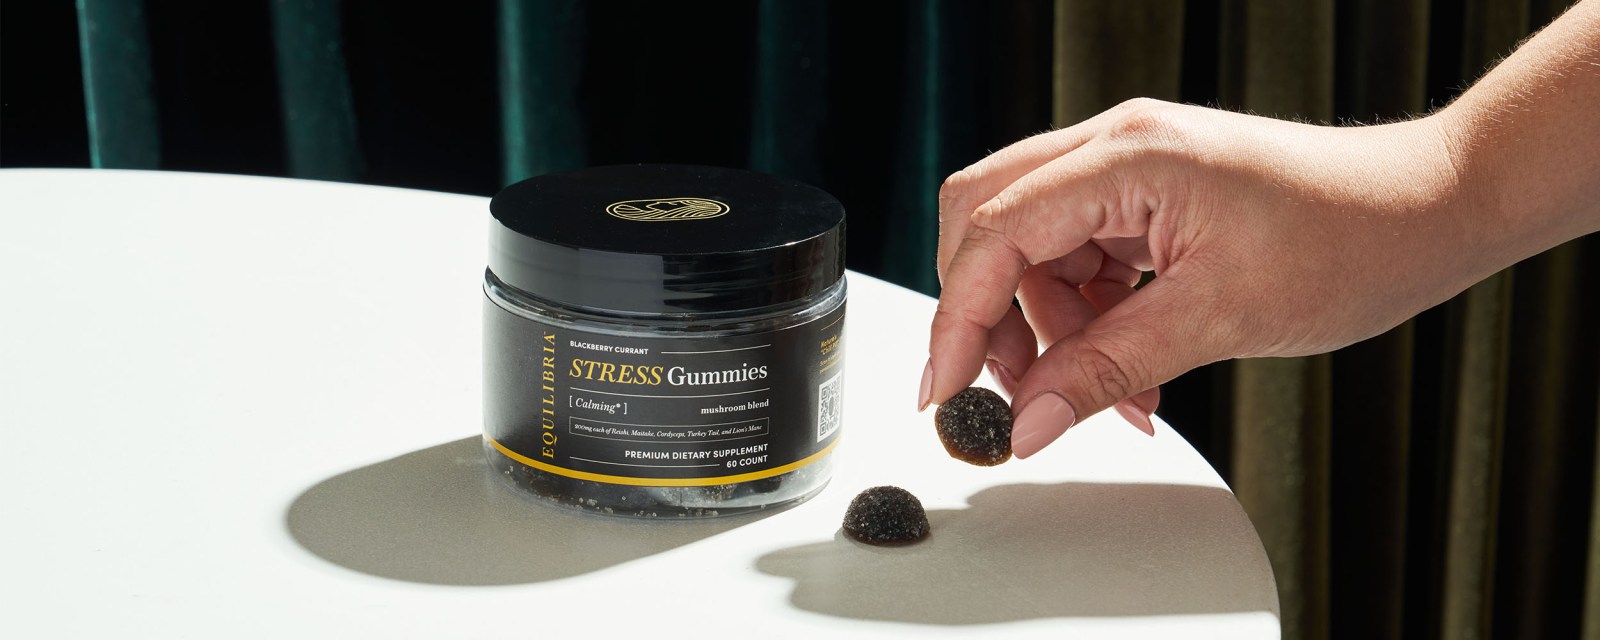 New Product! Stress Gummies for stress management